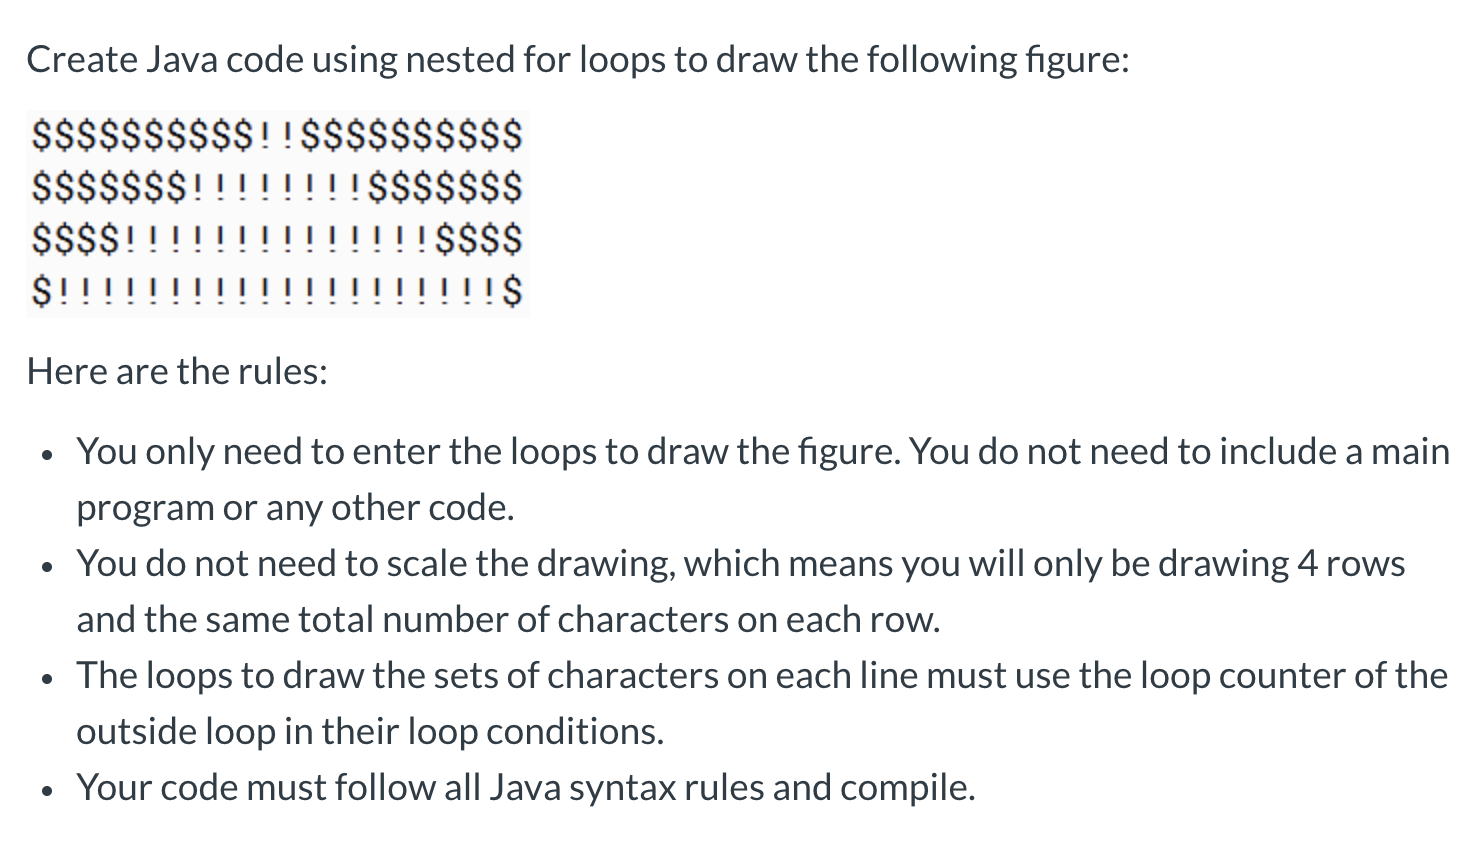 Create Java code using nested for loops to draw the following figure:
$$$$$$$$$$!!$$$$$$$$$$
$$$$$$$!
$$$$!!
$!
!$$$$$$$
!!$$$$
!!$
Here are the rules:
You only need to enter the loops to draw the figure. You do not need to include a main
program or any other code.
You do not need to scale the drawing, which means you will only be drawing 4 rows
and the same total number of characters on each row.
The loops to draw the sets of characters on each line must use the loop counter of the
outside loop in their loop conditions.
• Your code must follow all Java syntax rules and compile.
